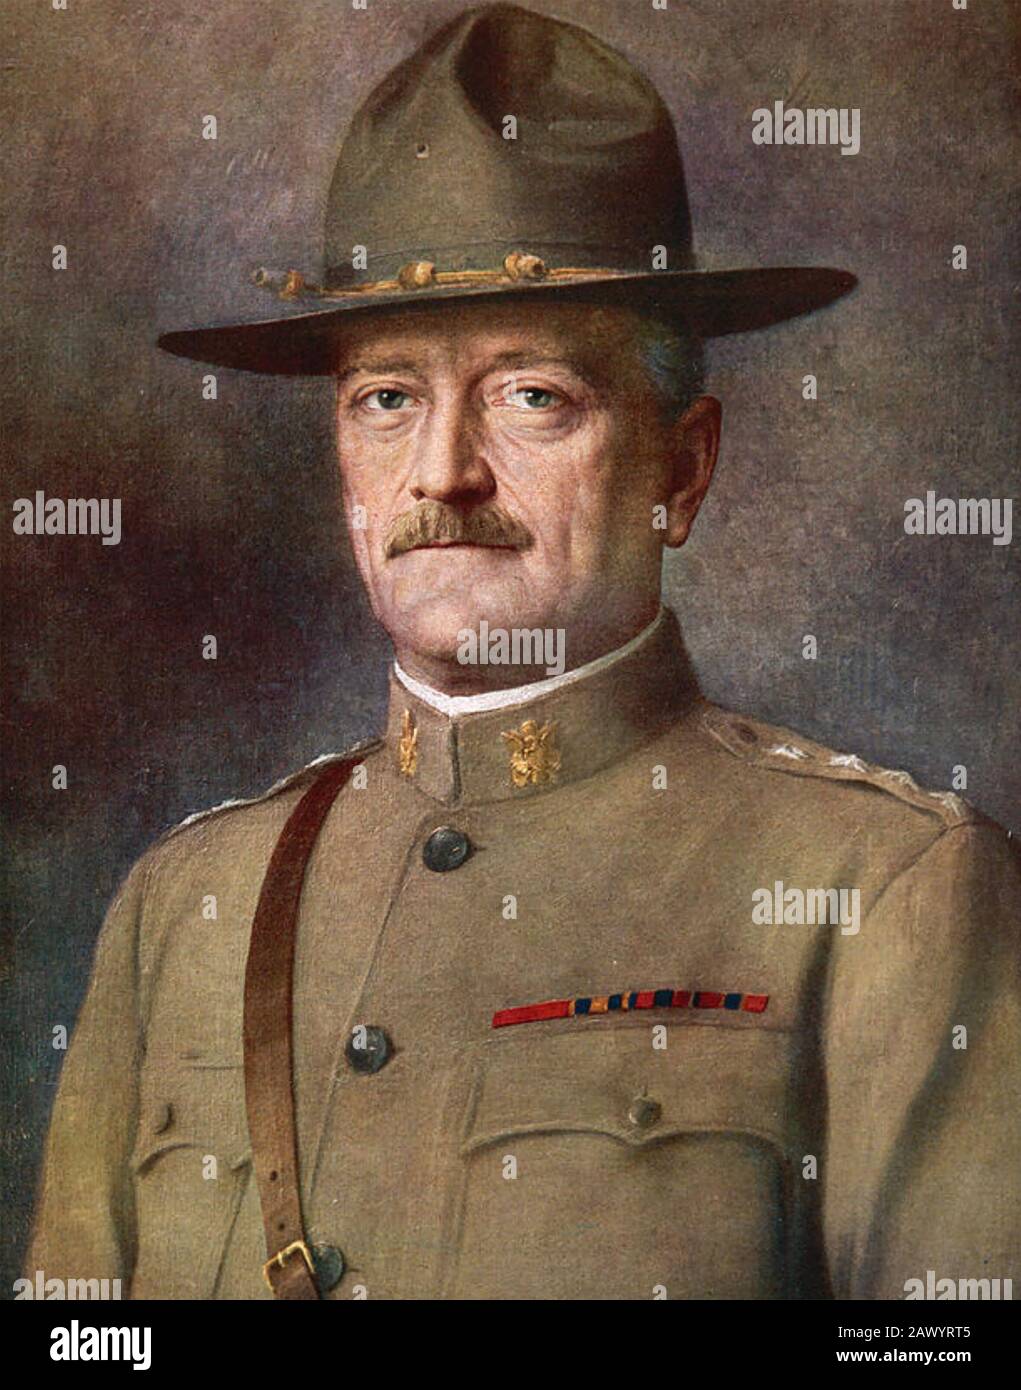 JOHN J. PERSHING  (1860-1948) United States Army officer in 1917 Stock Photo